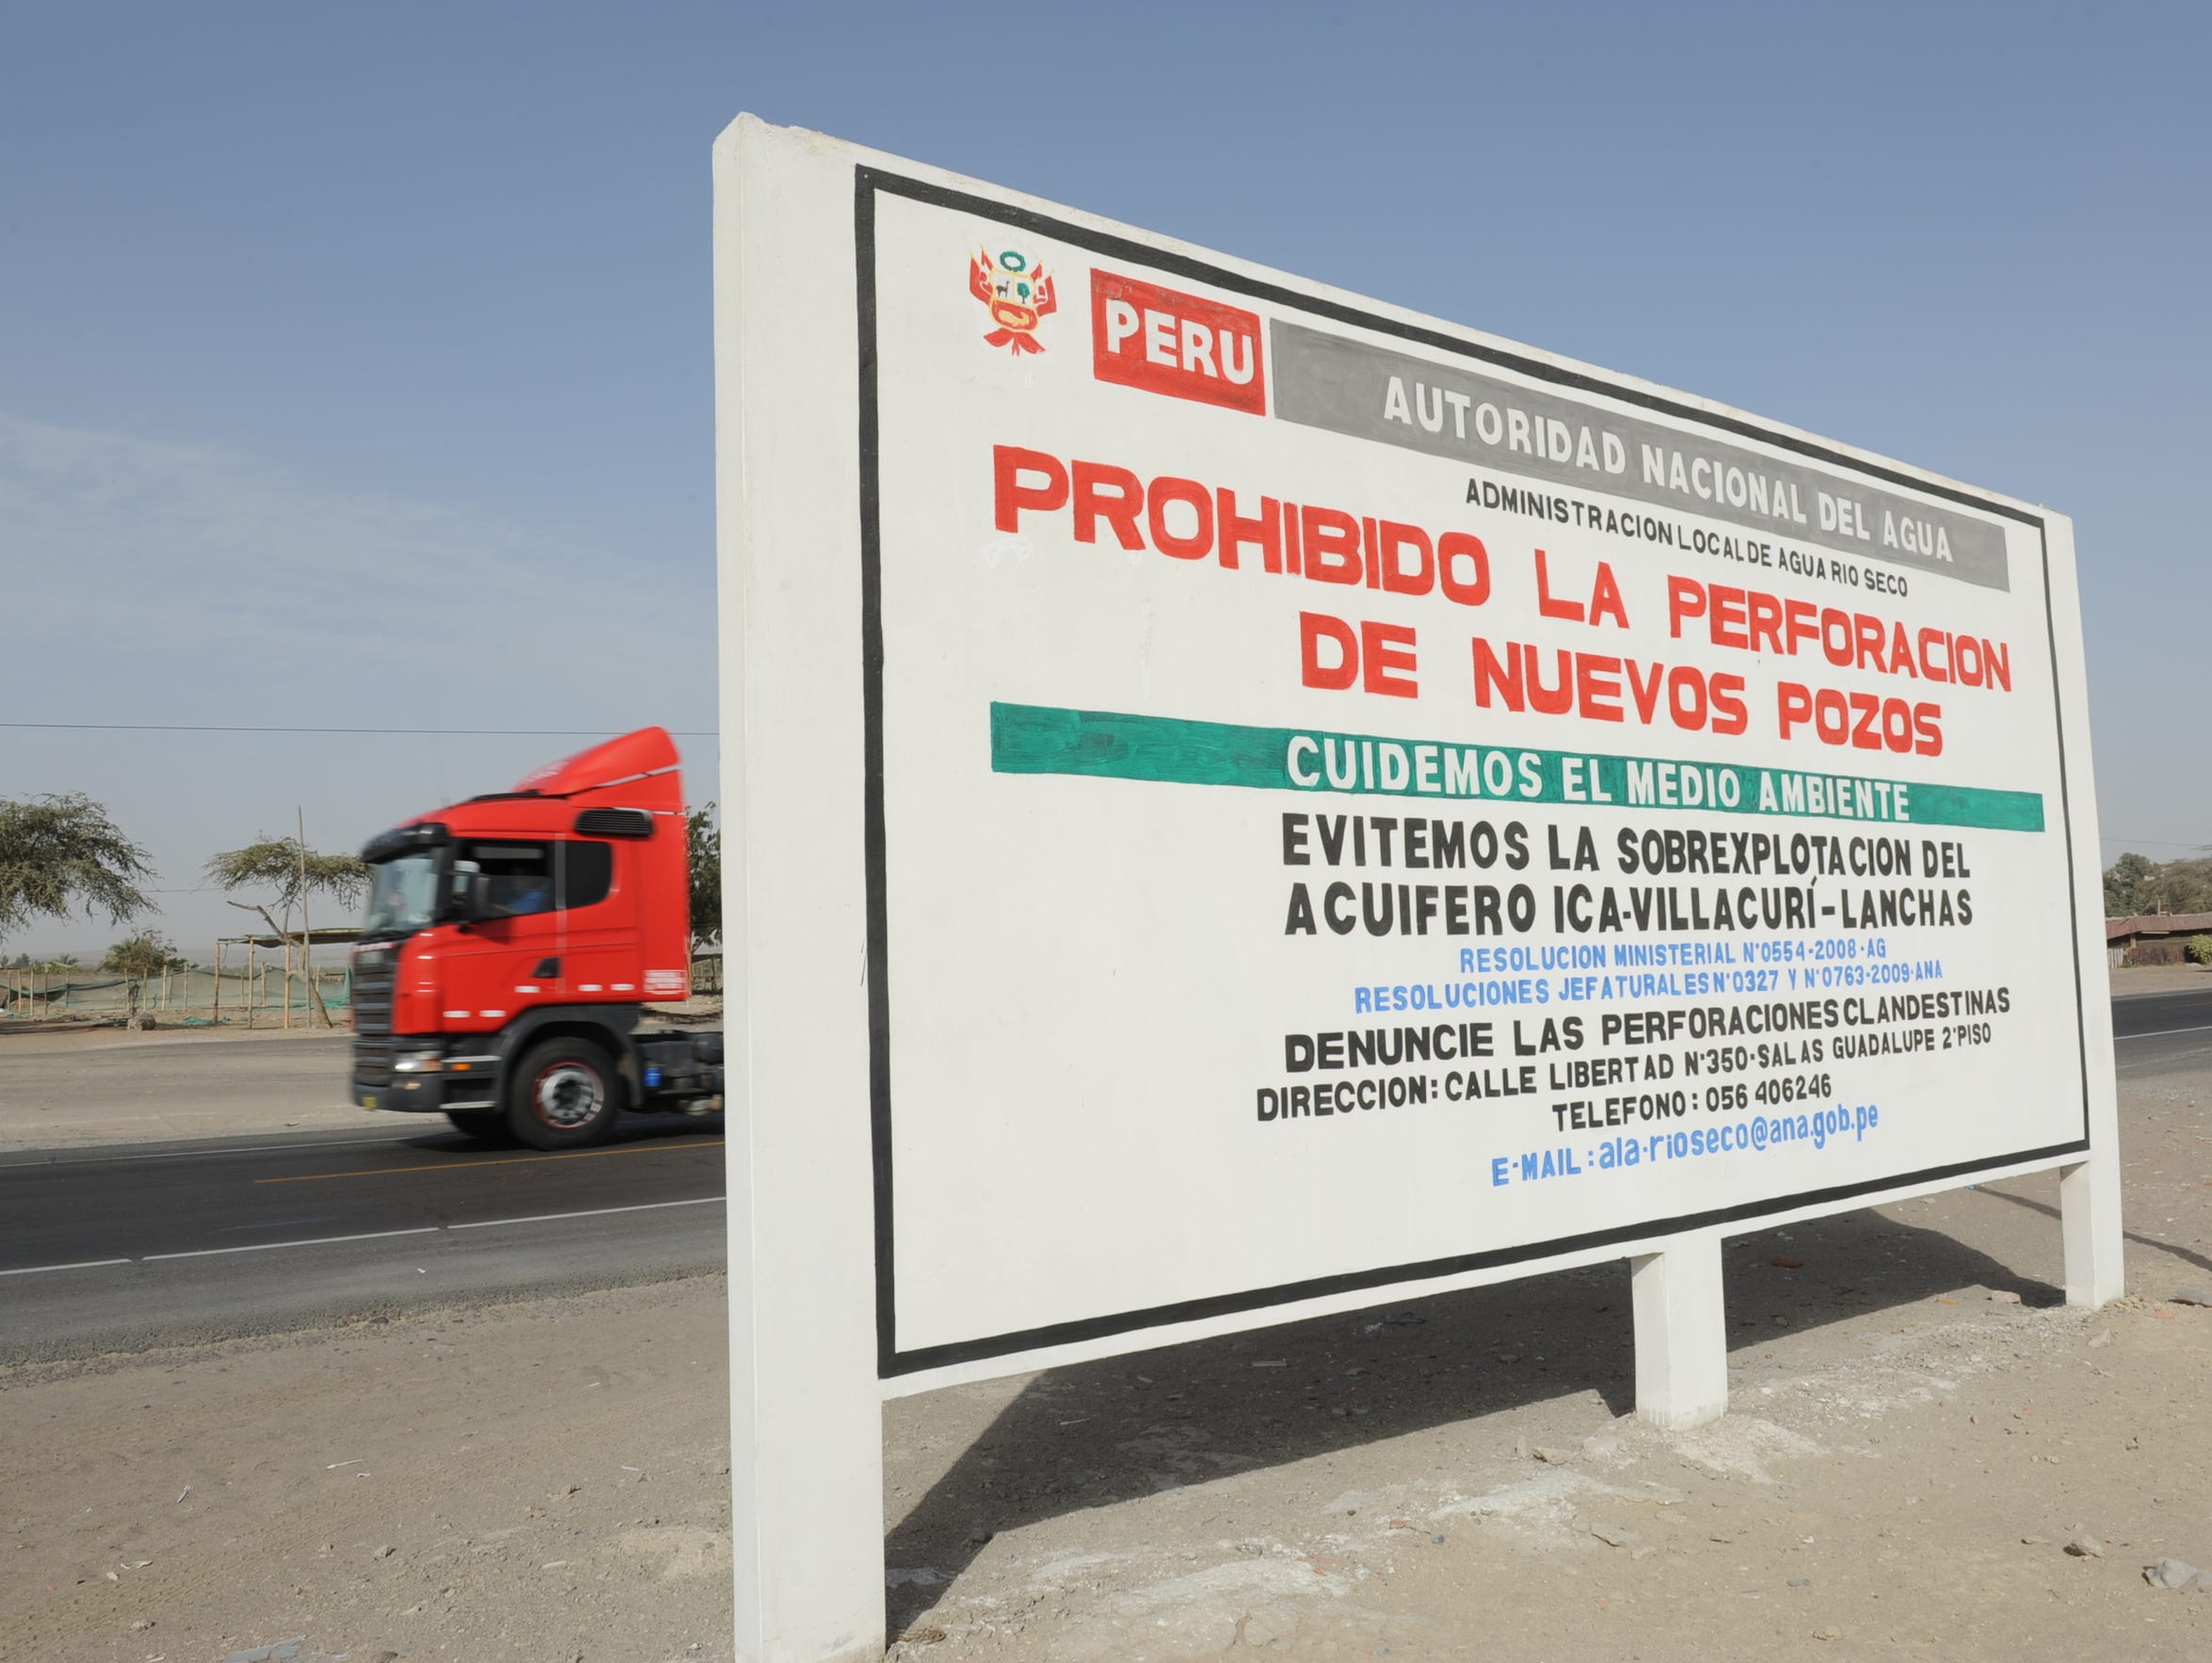 08132015 -- Pisco, Peru --

A sign on the Pan-American